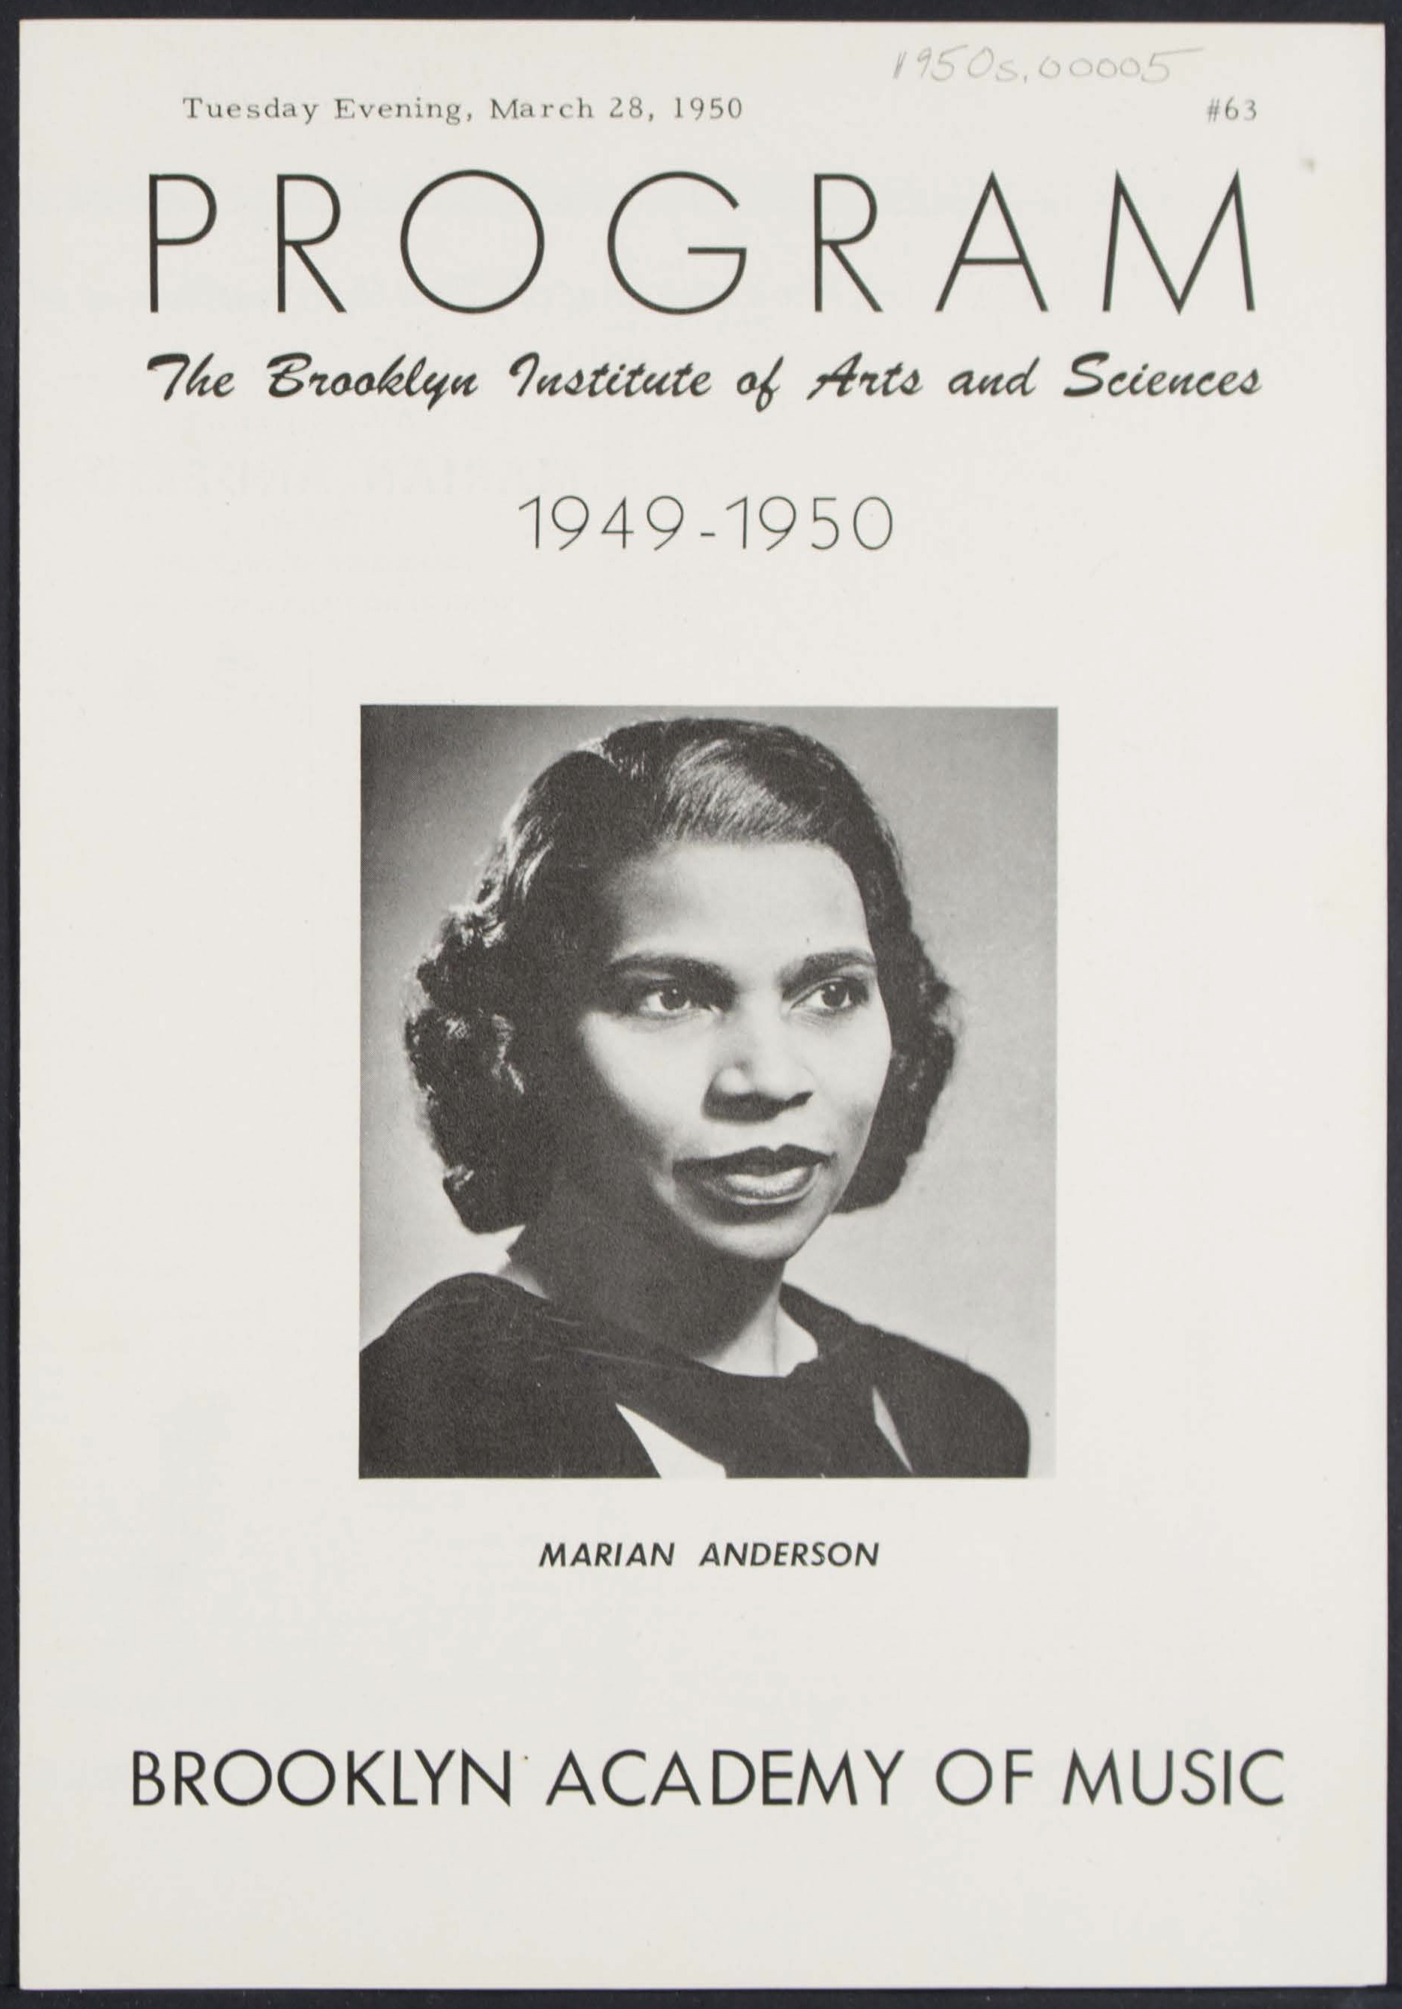 Brooklyn Academy of Music Puts Online 70,000 Objects Documenting the History of the Performing Arts Artes & contextos Marion Anderson